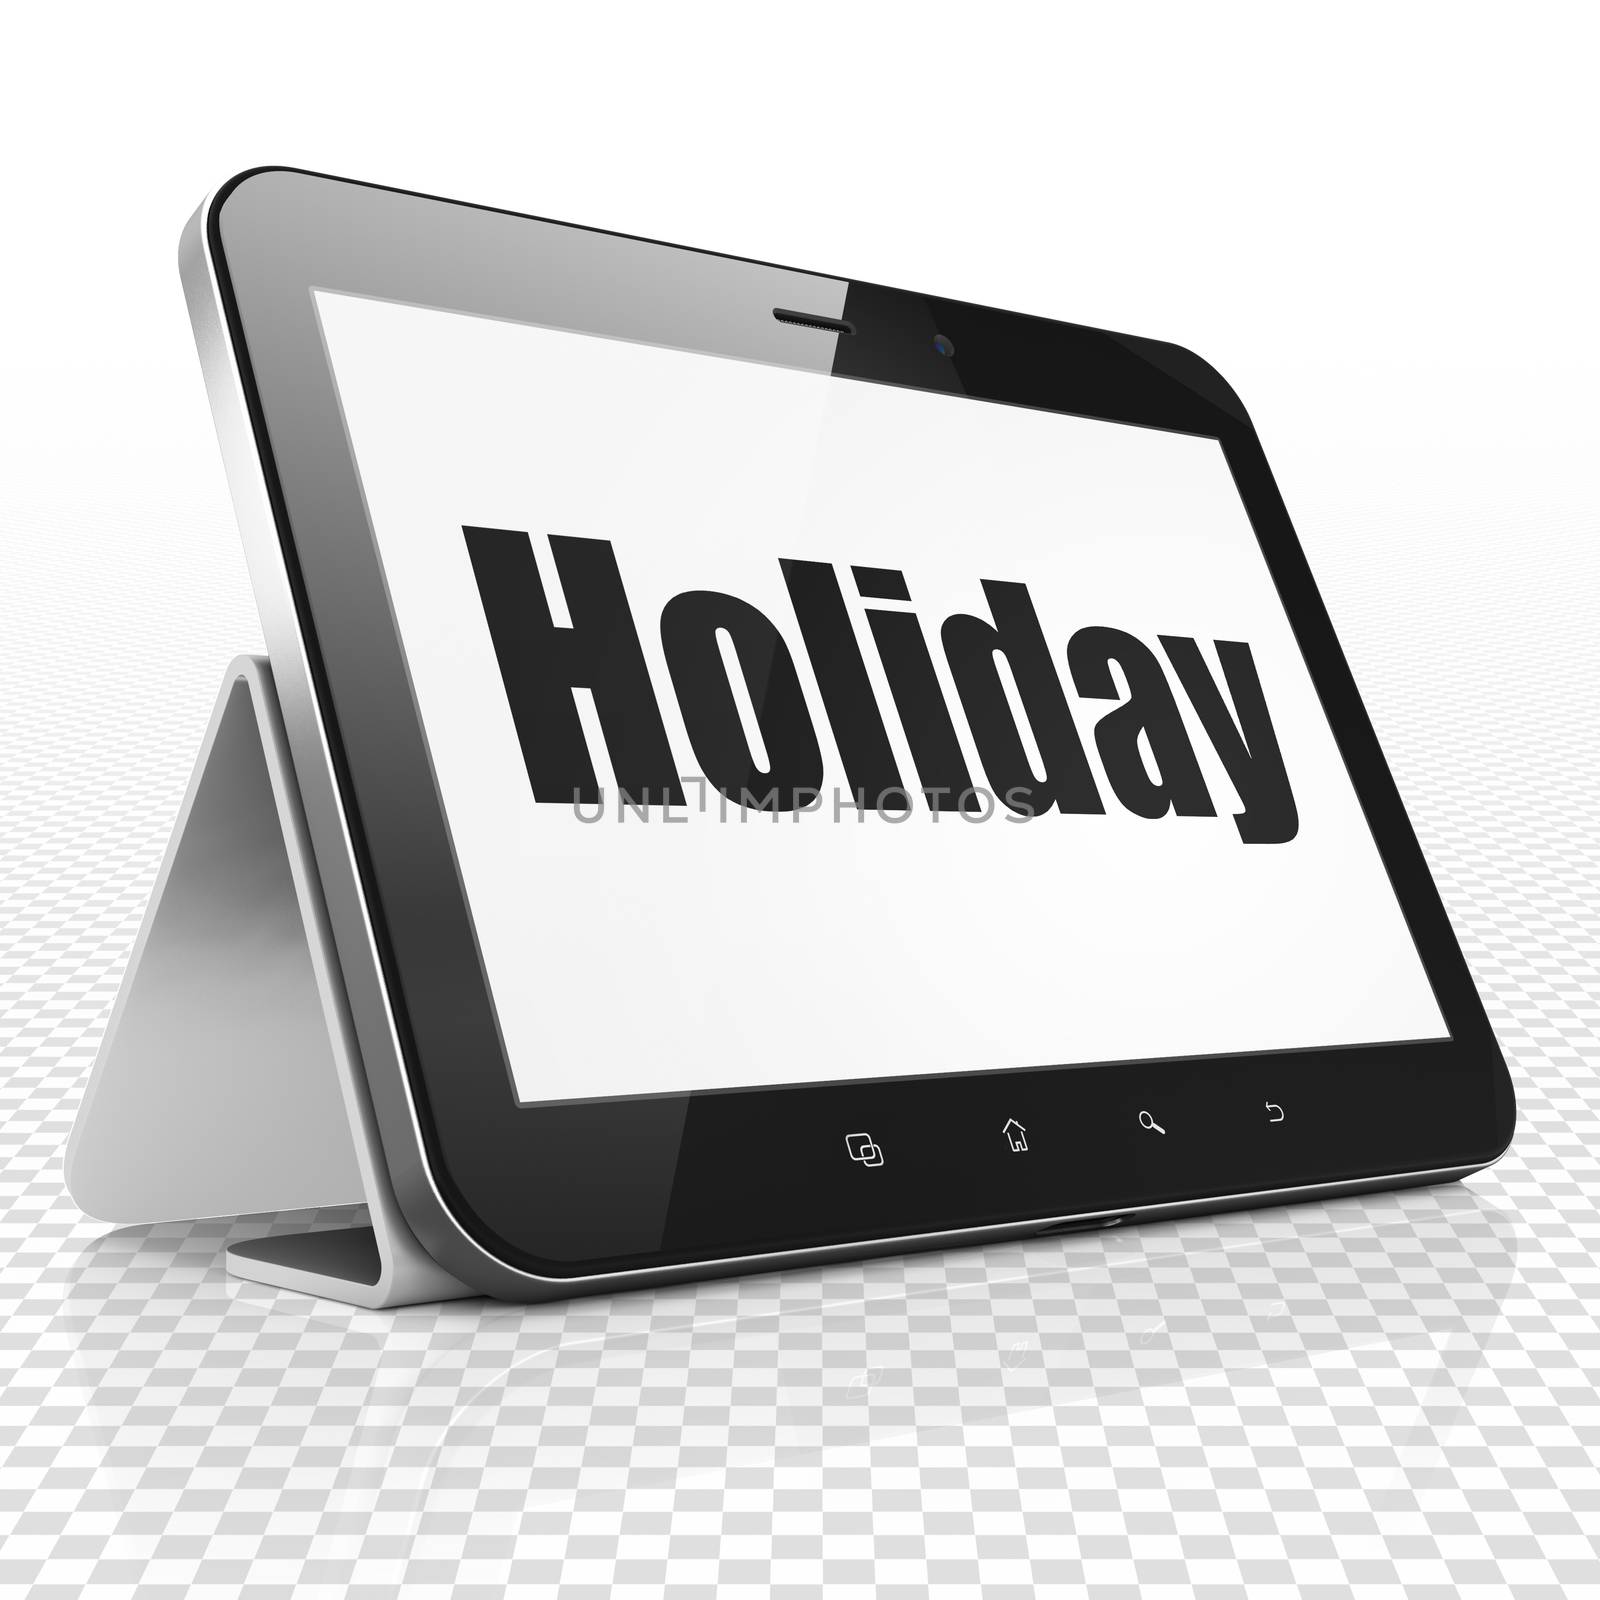 Travel concept: Tablet Computer with black text Holiday on display, 3D rendering